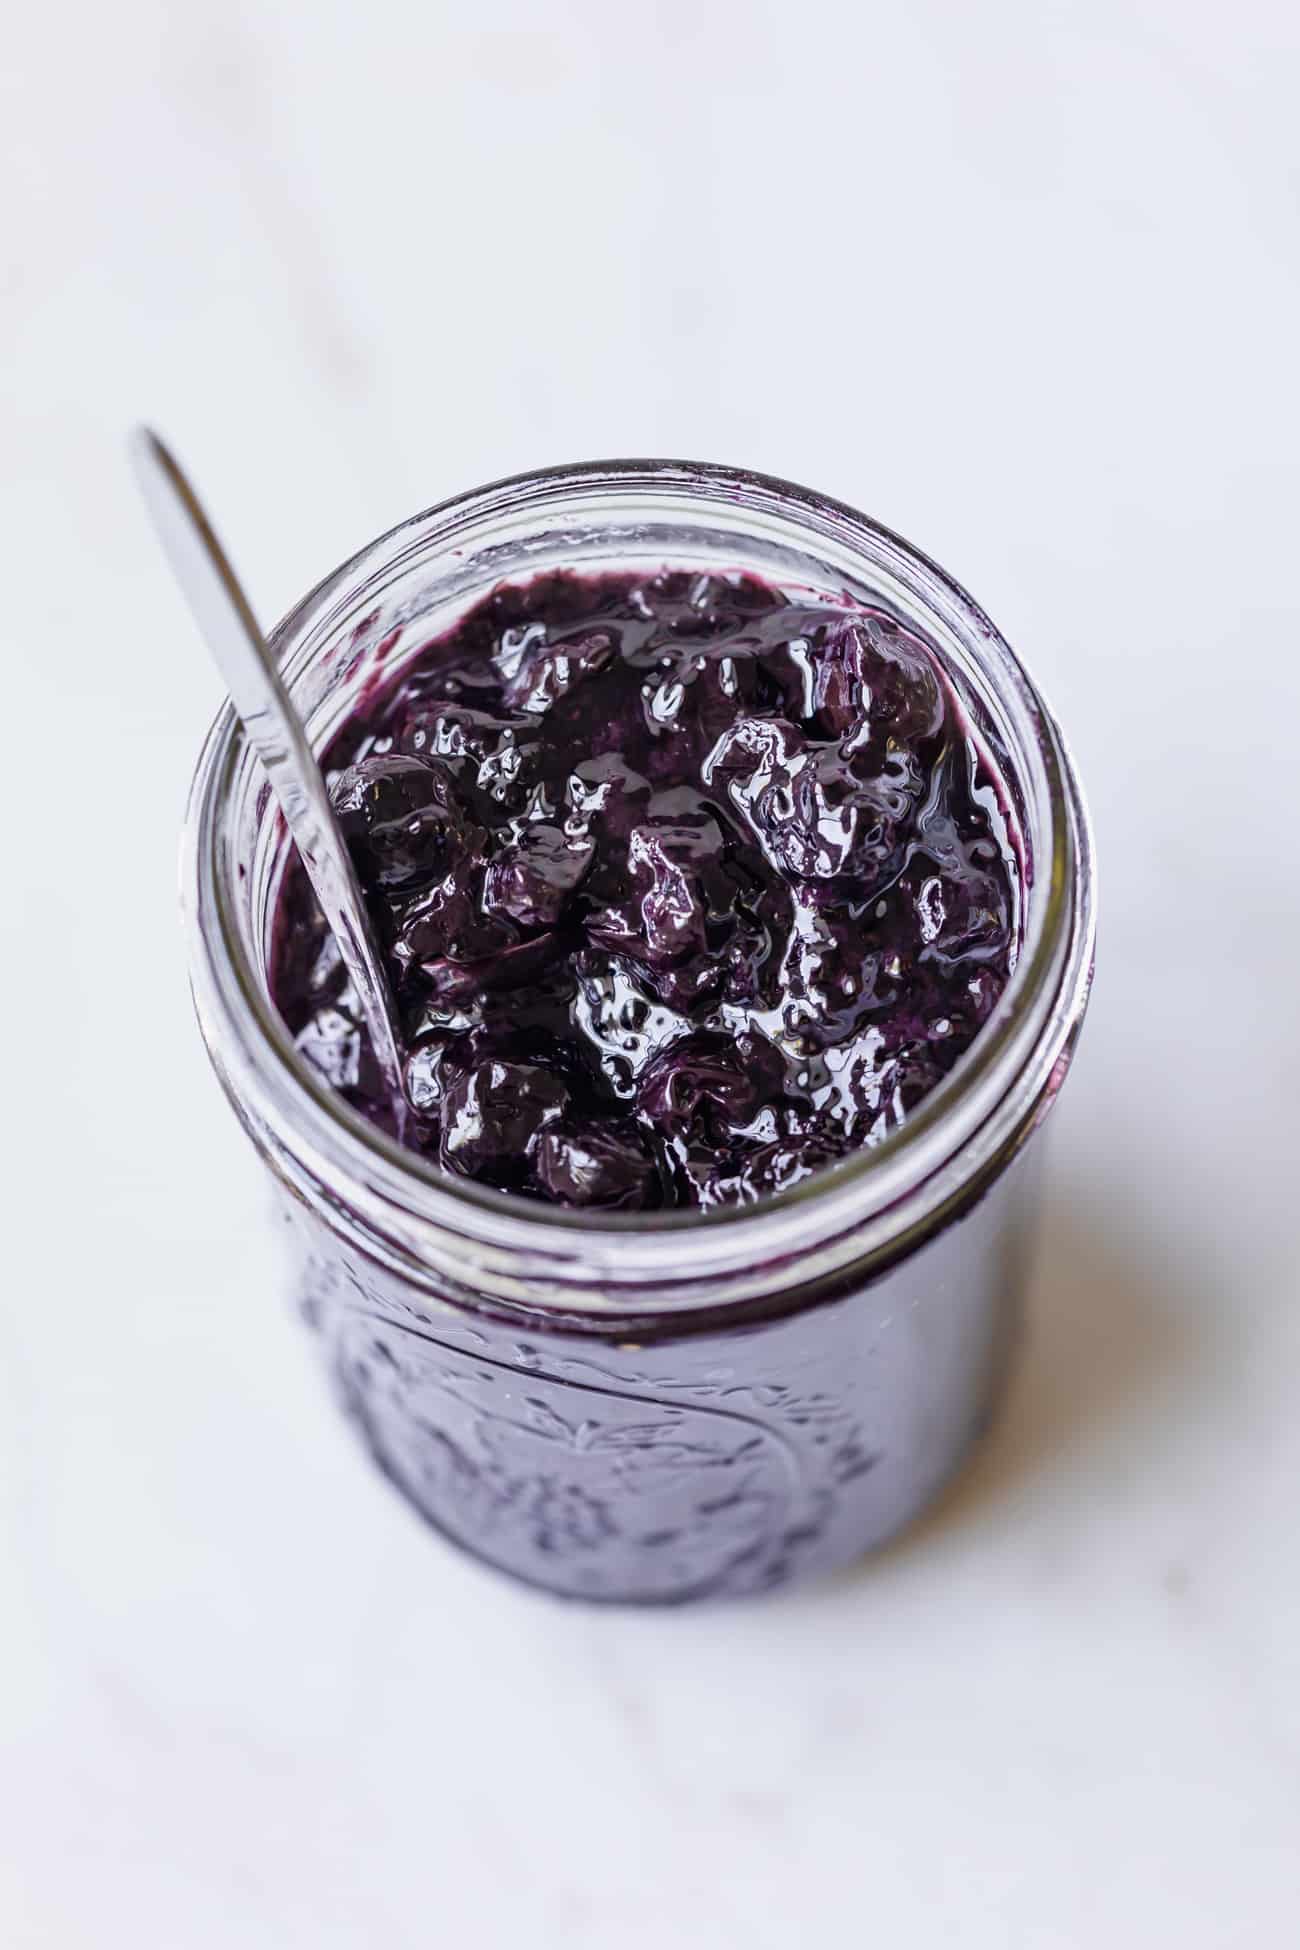 homemade blueberry jam in a glass jar with a spoon inside